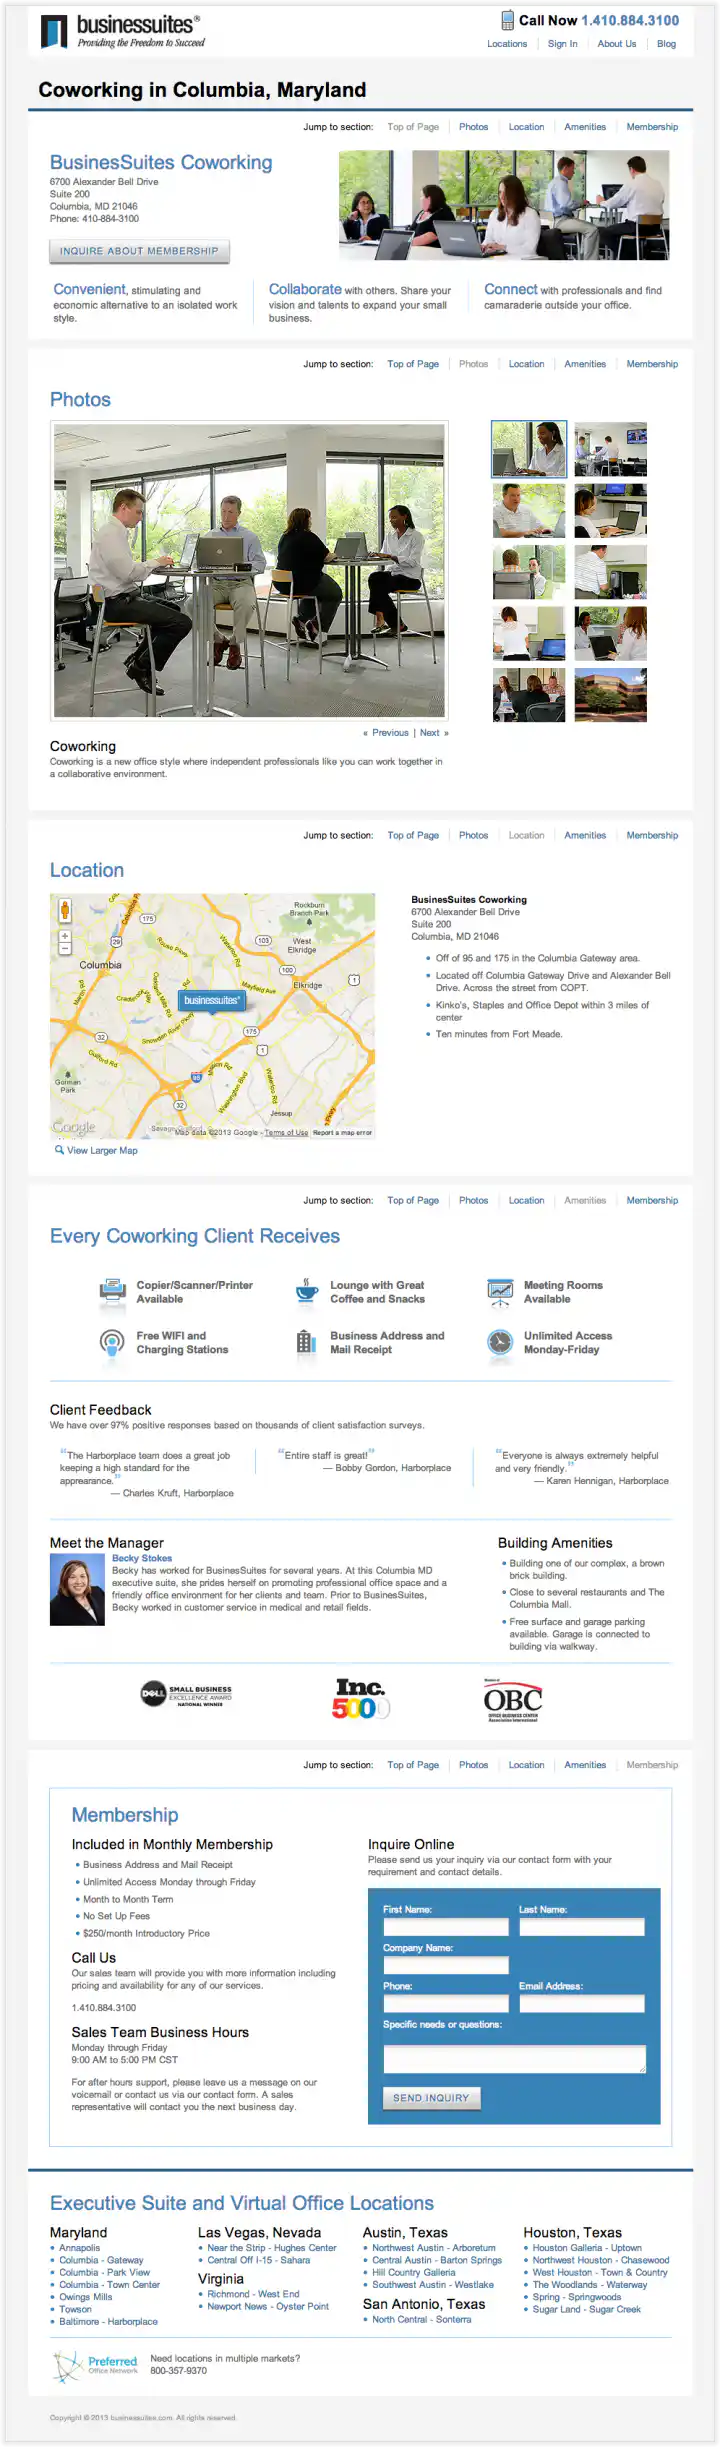 BusinesSuites Coworking Example Page 2